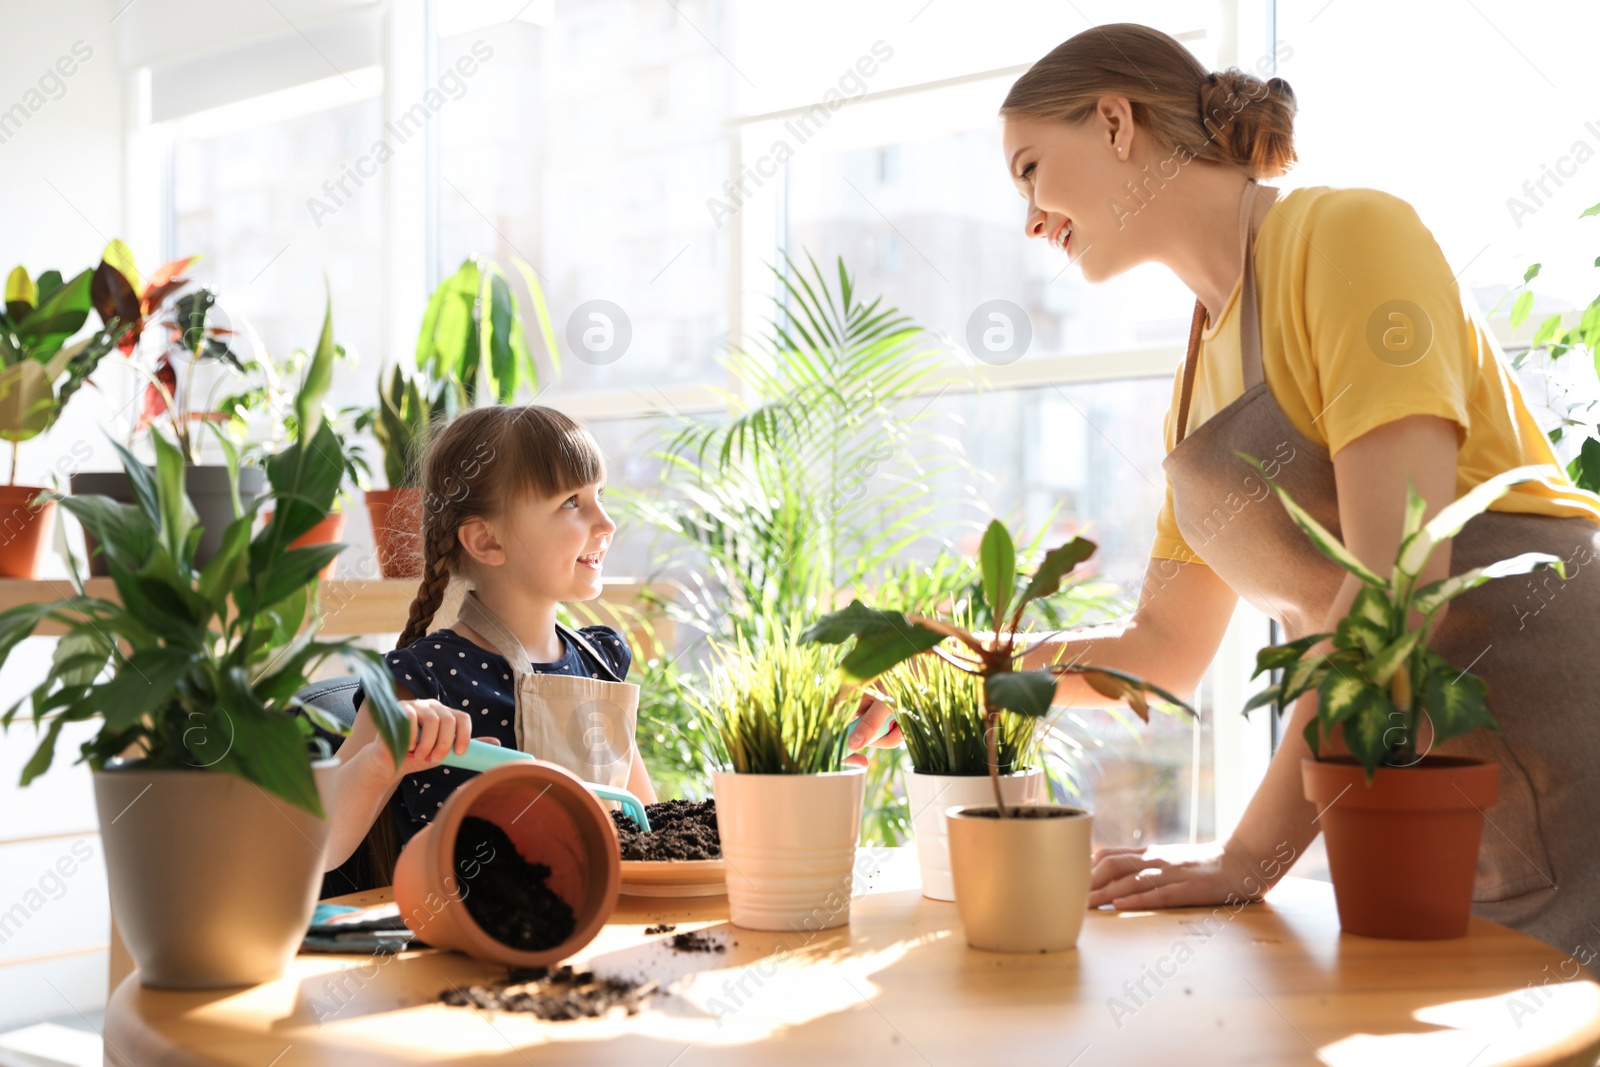 Photo of Mother and daughter taking care of home plants at table indoors